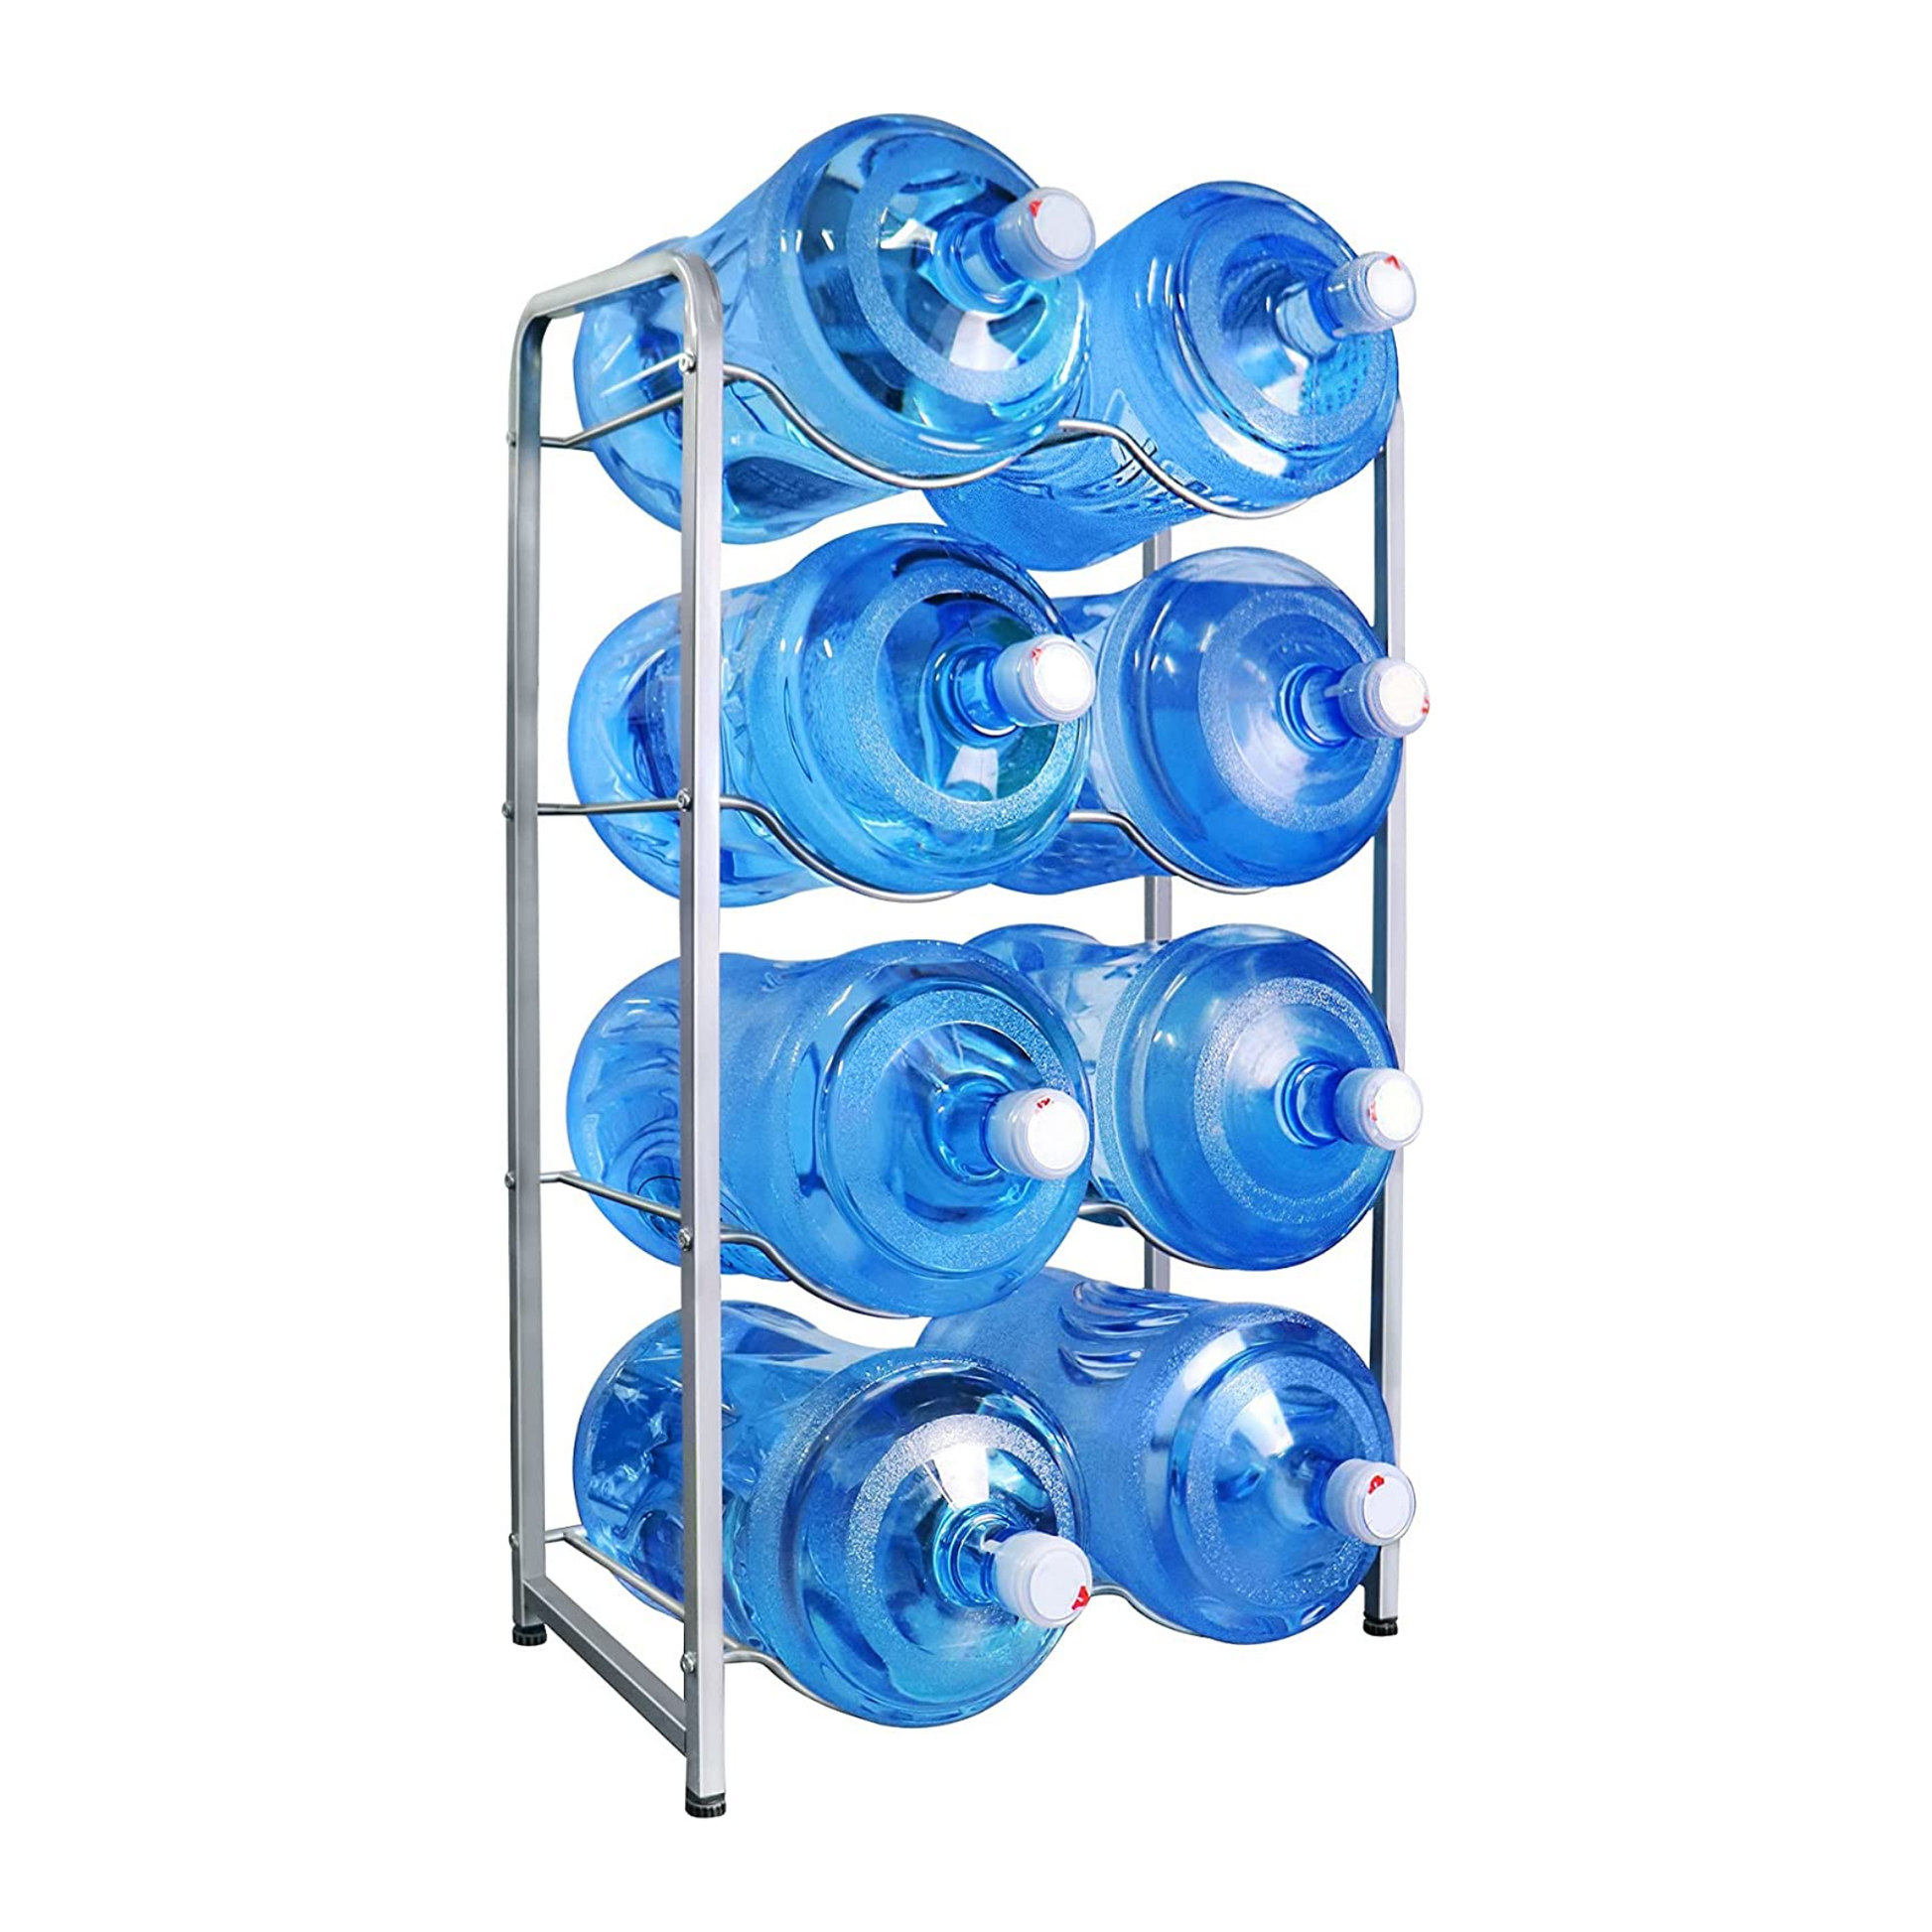 Maximize Your Space with a 4-Tier Double 5-Gallon Water Bottle Rack